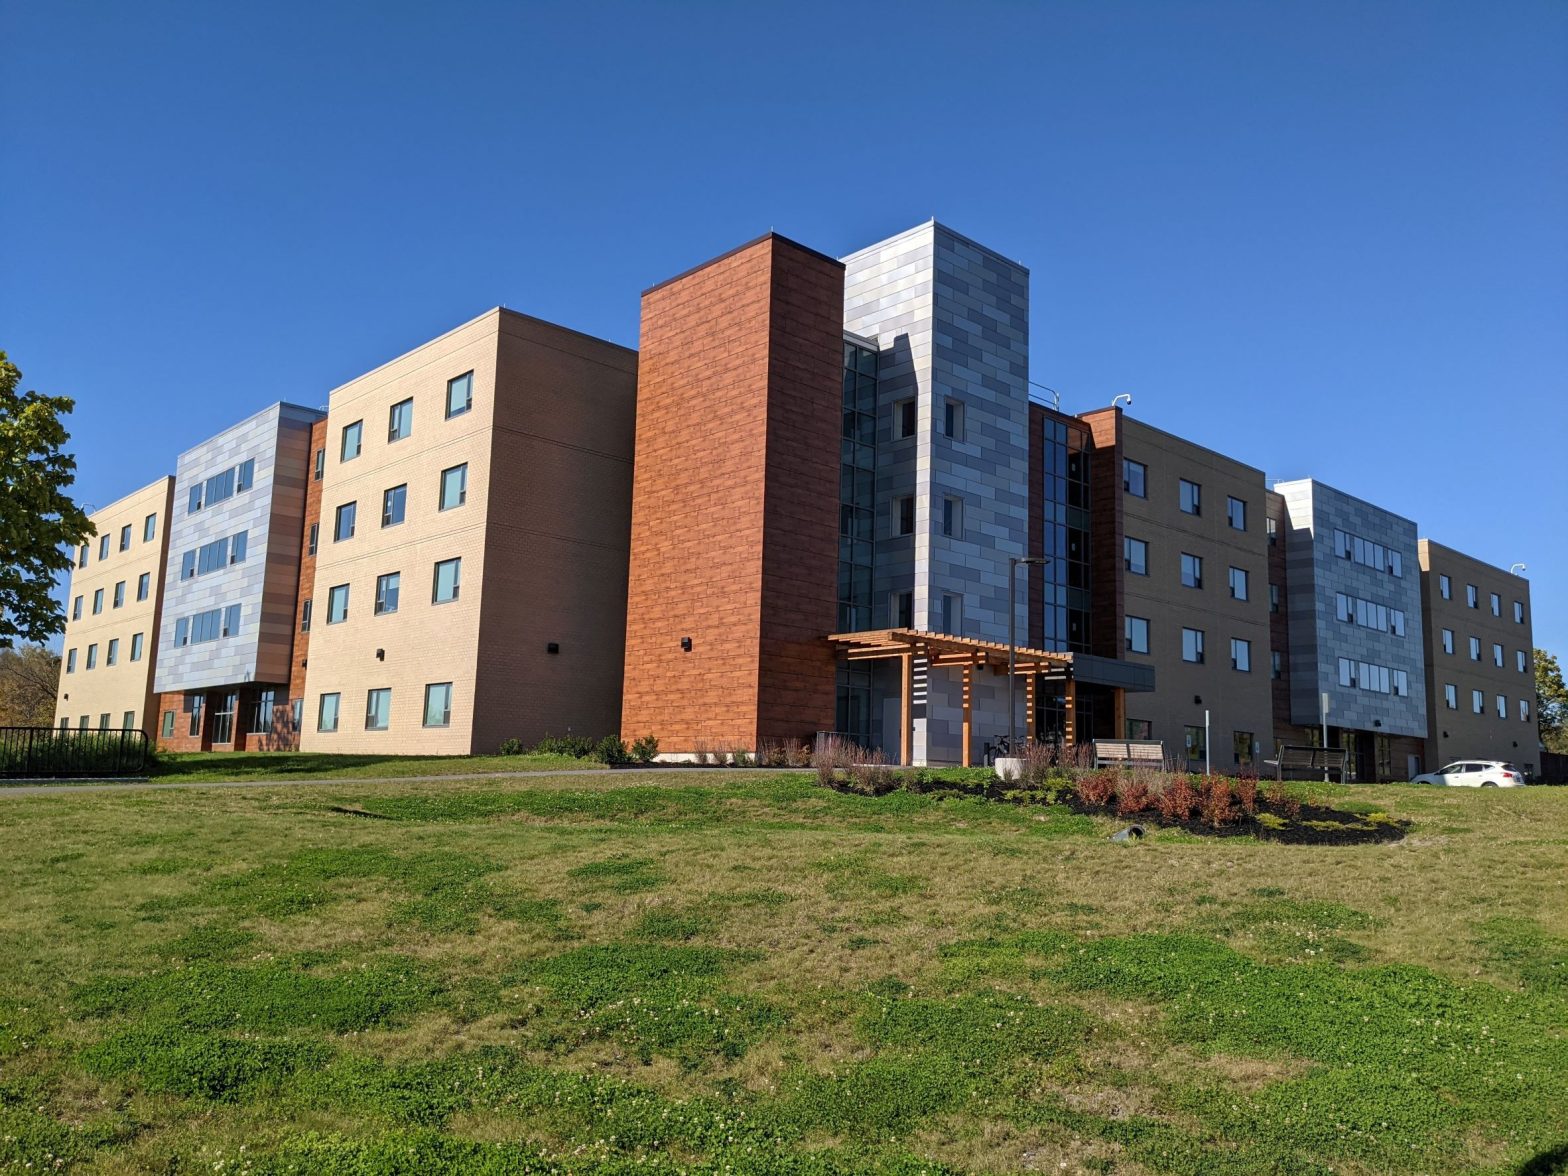 Exterior Overall view of contemporary net-zero energy, zero-net carbon dormitory with brick, metal panel and wood with a large wood trellis at the main entry into residence hall.